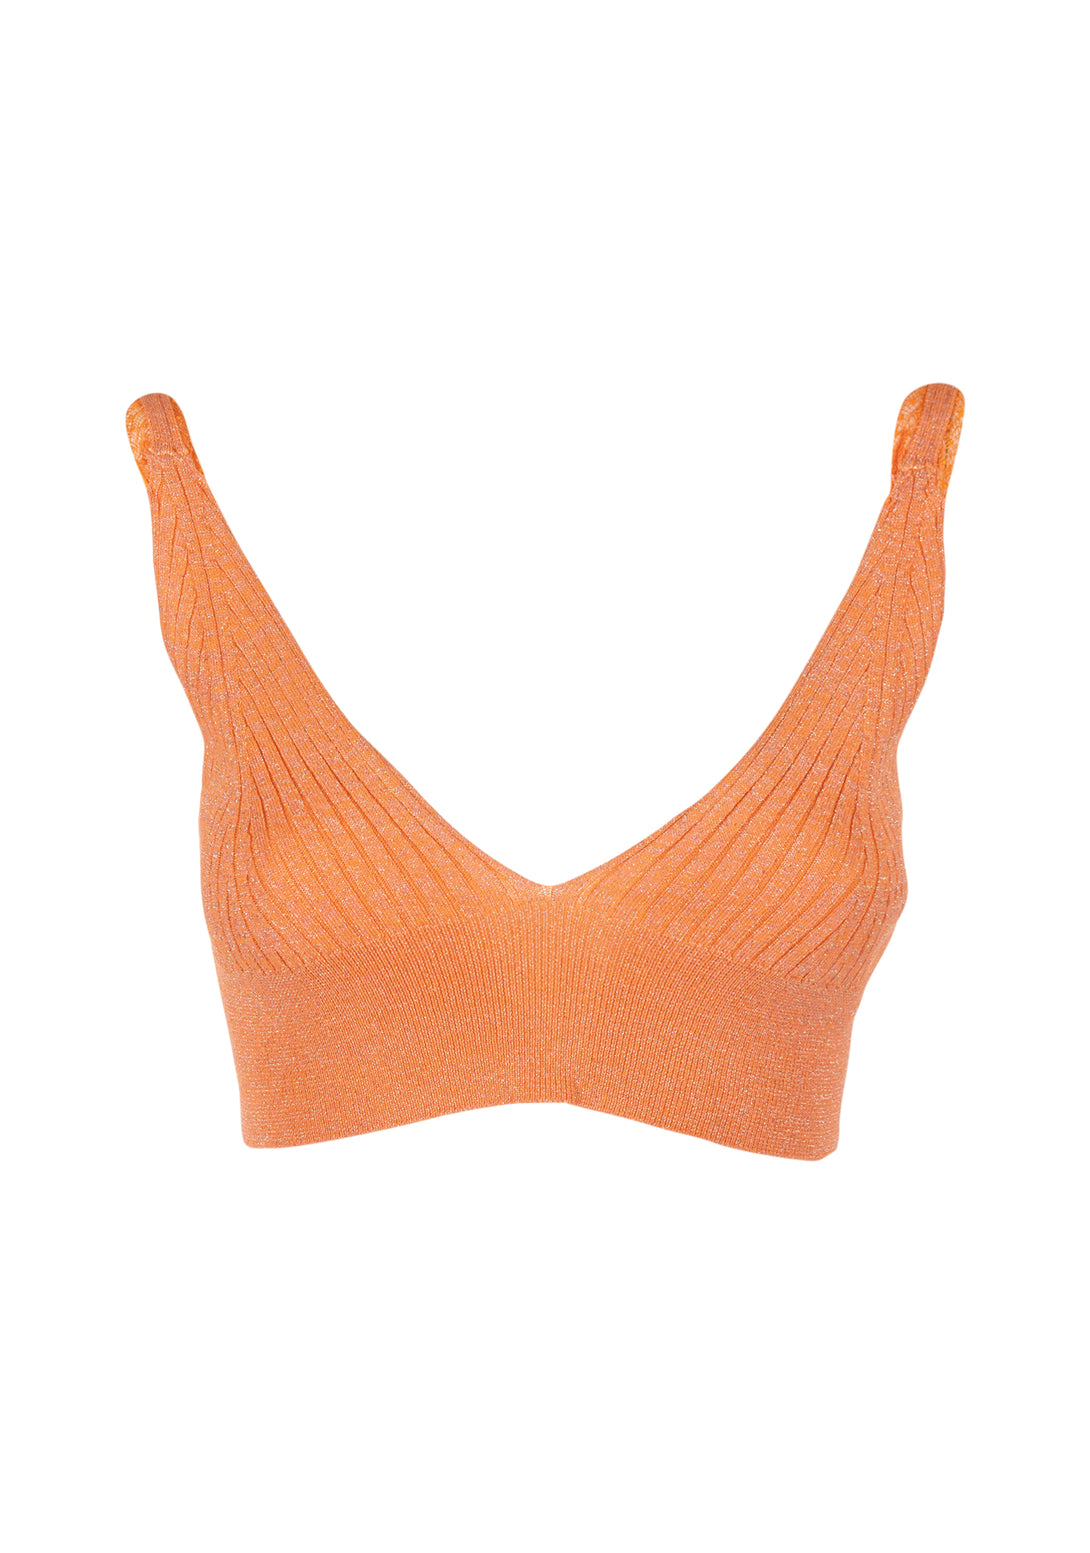 Knitted top slim fit bralette style